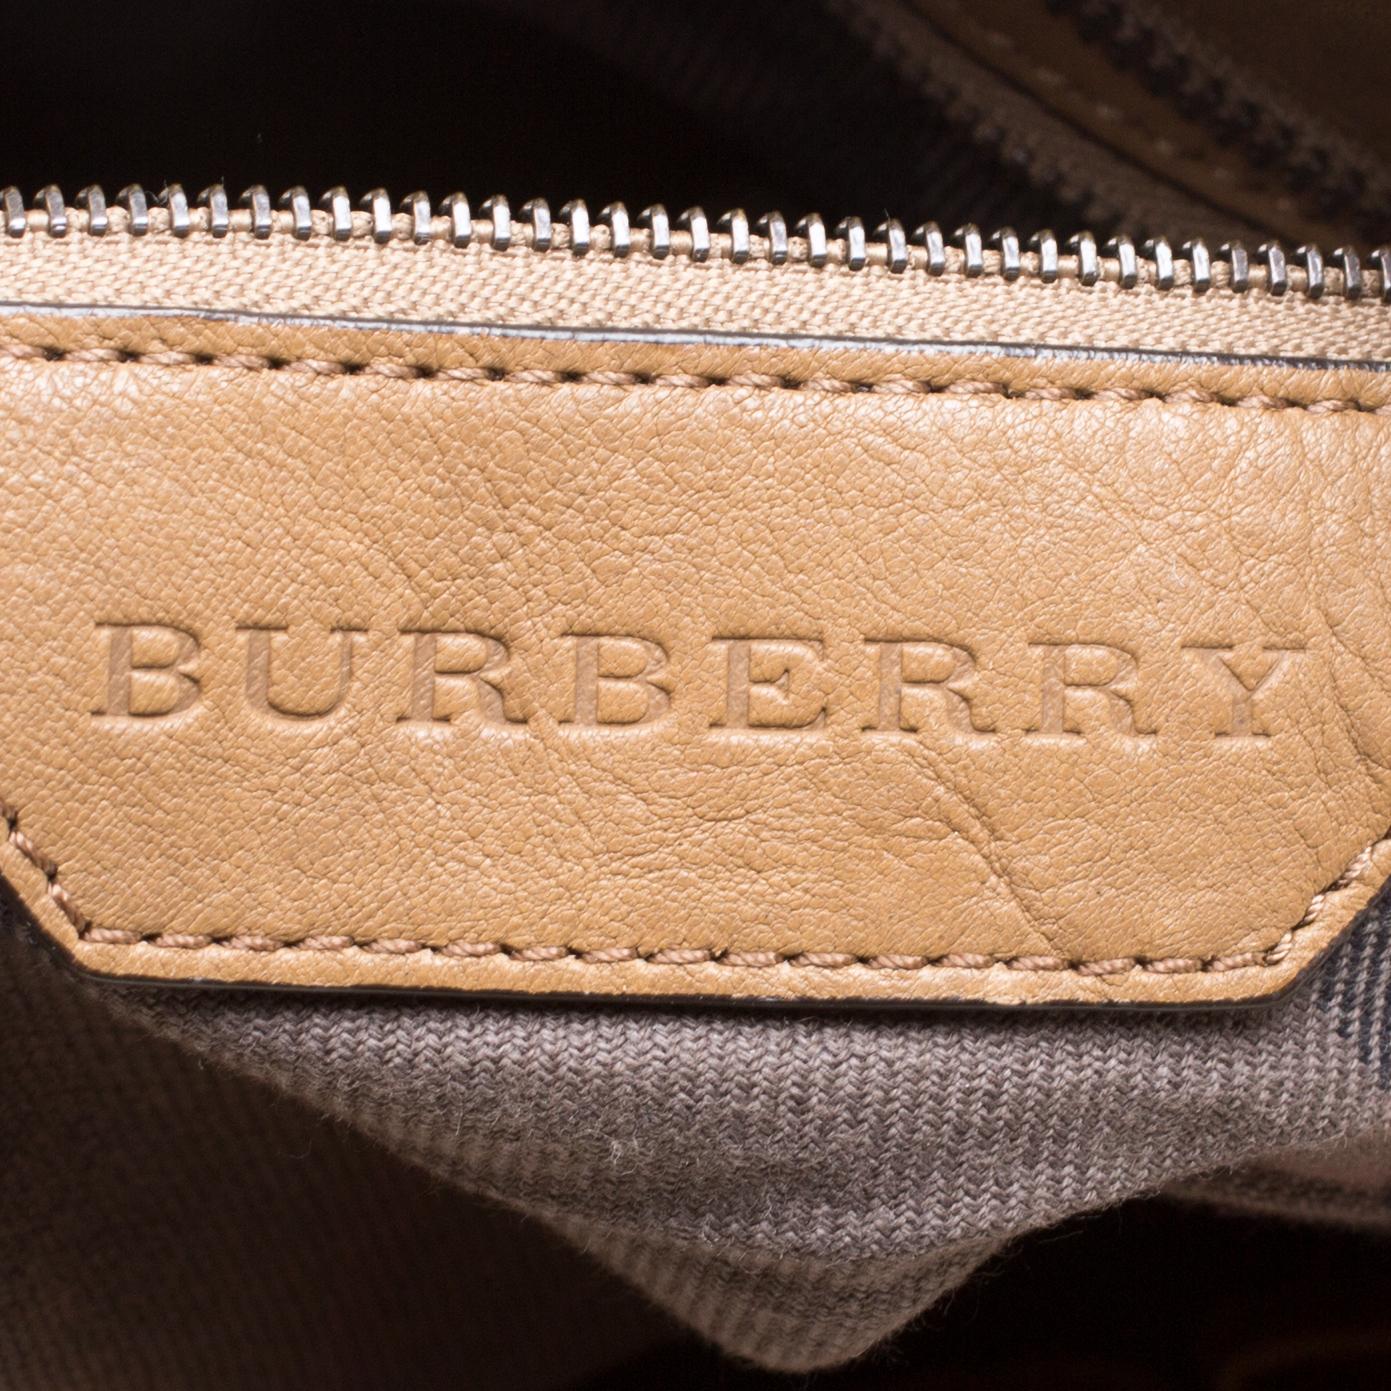 Burberry Brown Quilted Leather Tote 5